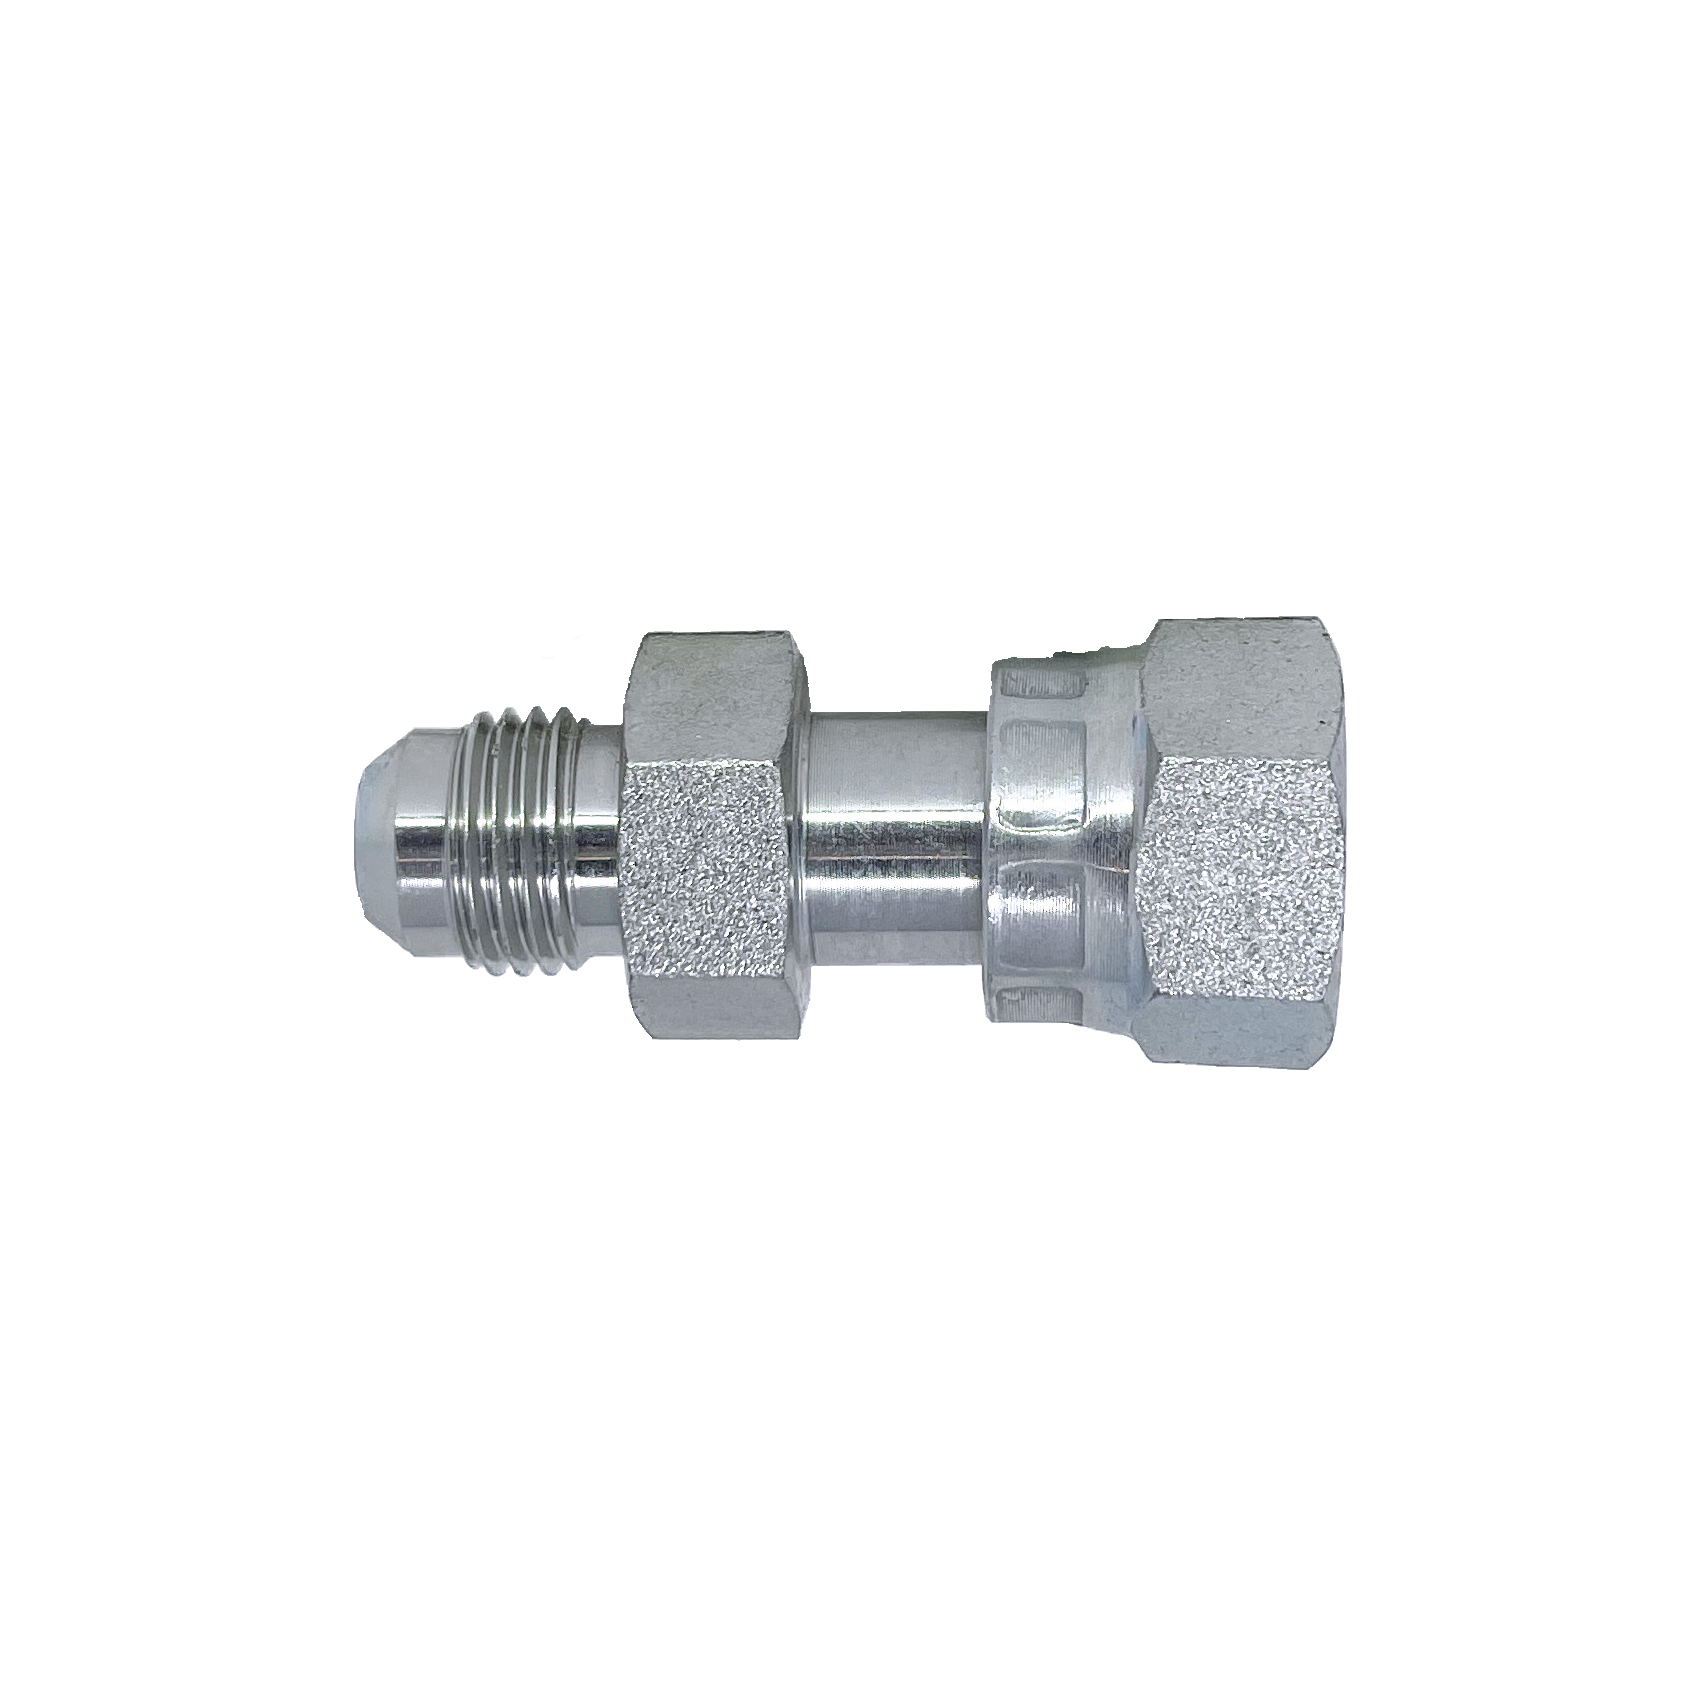 6620-24-24 : Adaptall Straight Adapter, Male 1.5 (1-1/2") JIC x Female 1.5 (1-1/2") ORFS, Carbon Steel